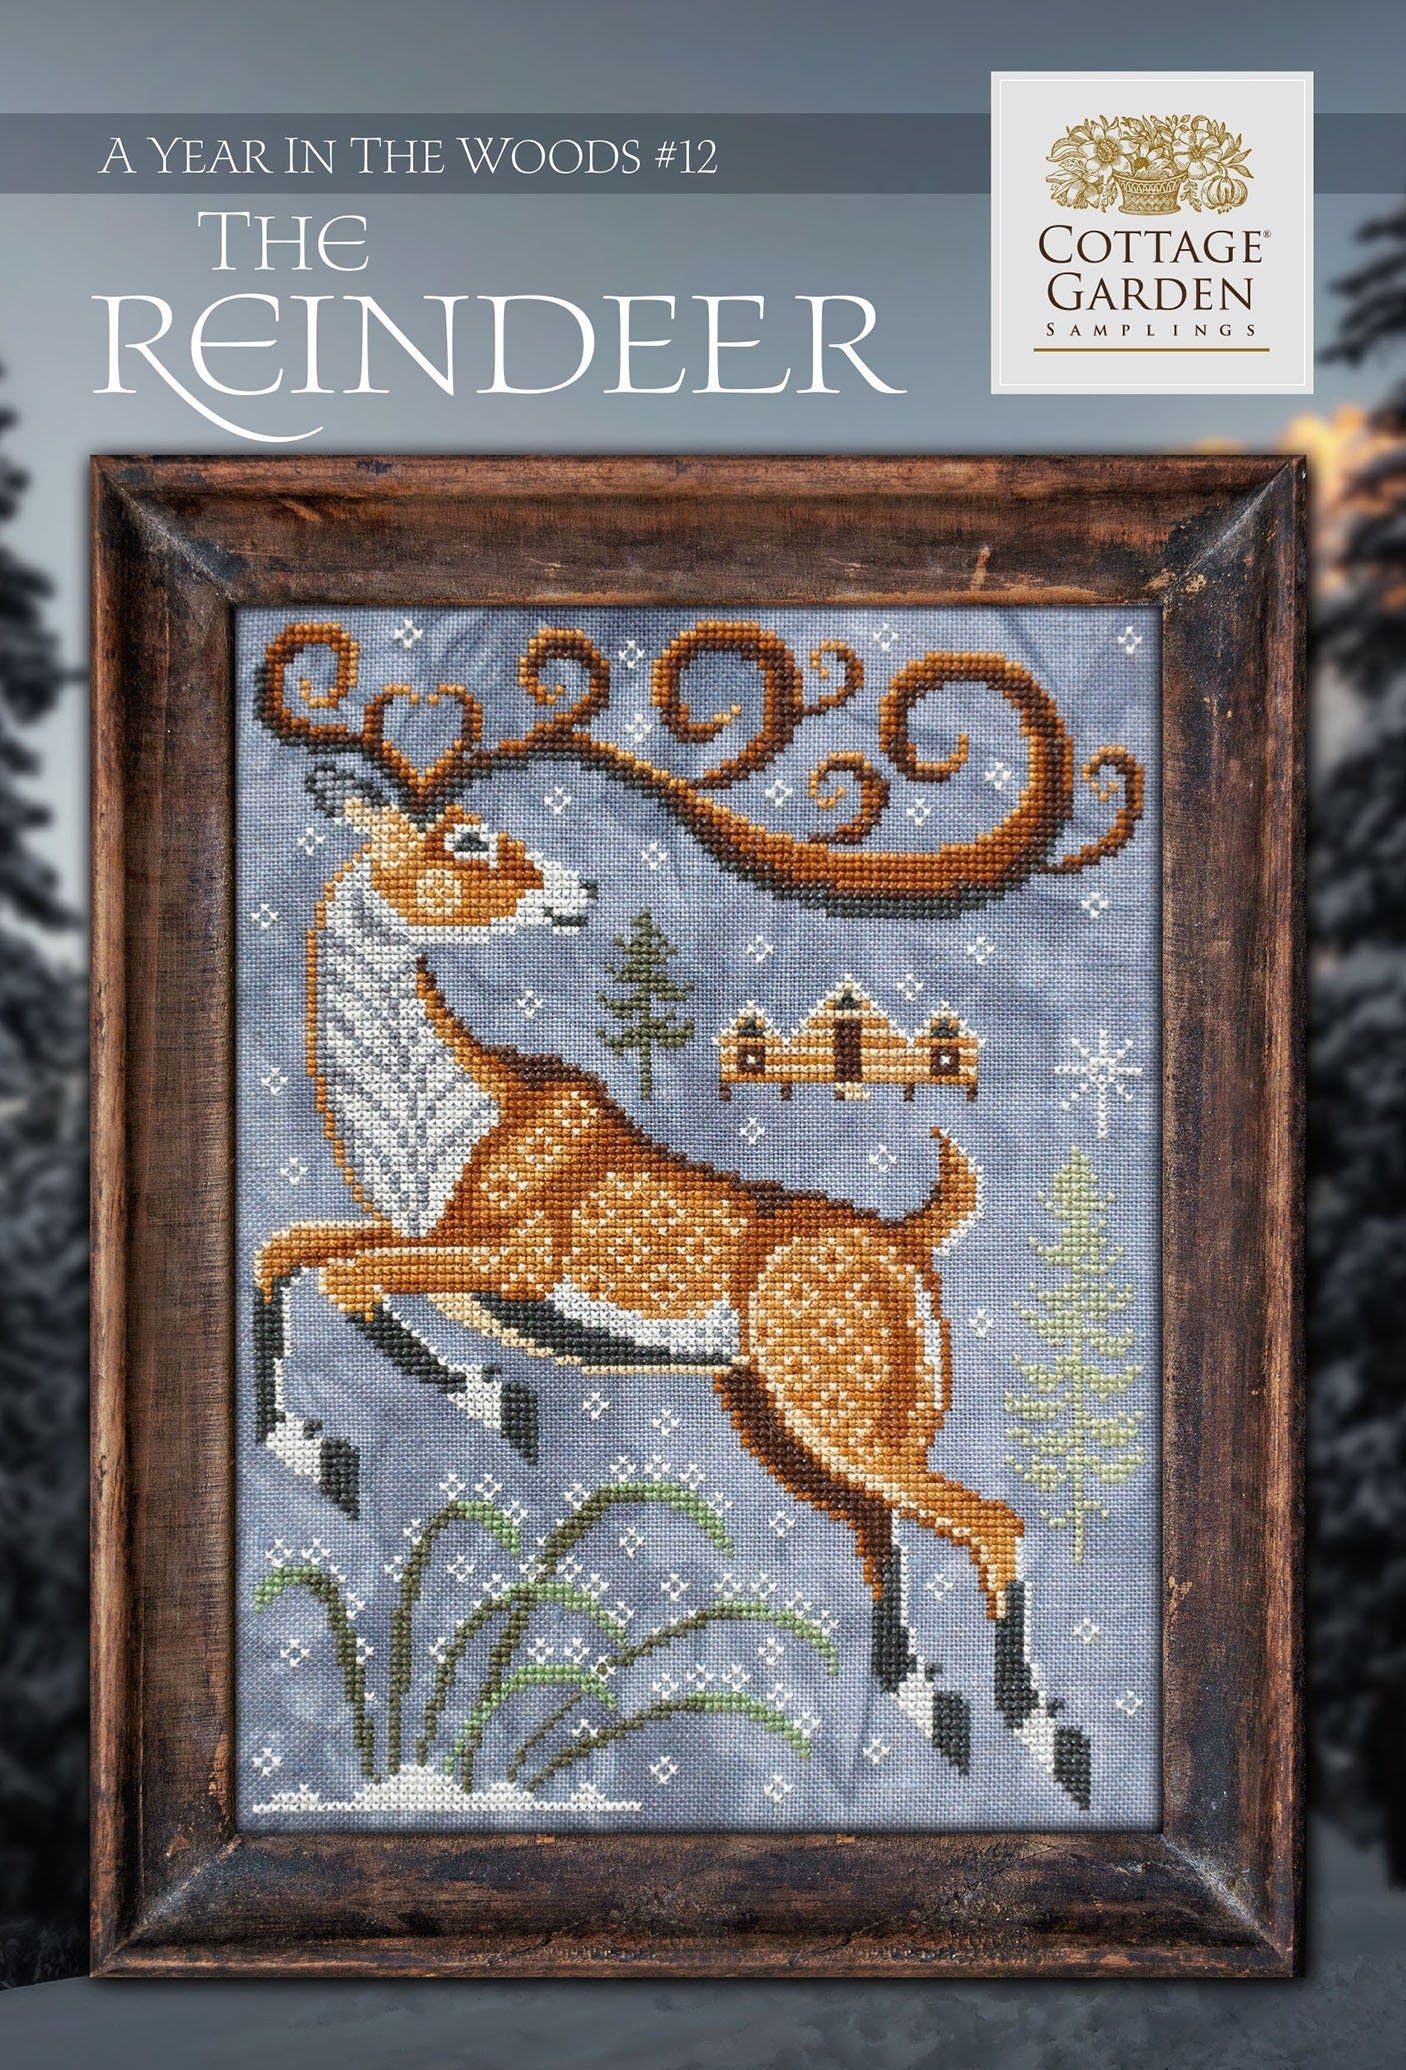 The Reindeer- A Year in the Woods #12 - Cottage Garden Samplings - Cross Stitch Pattern